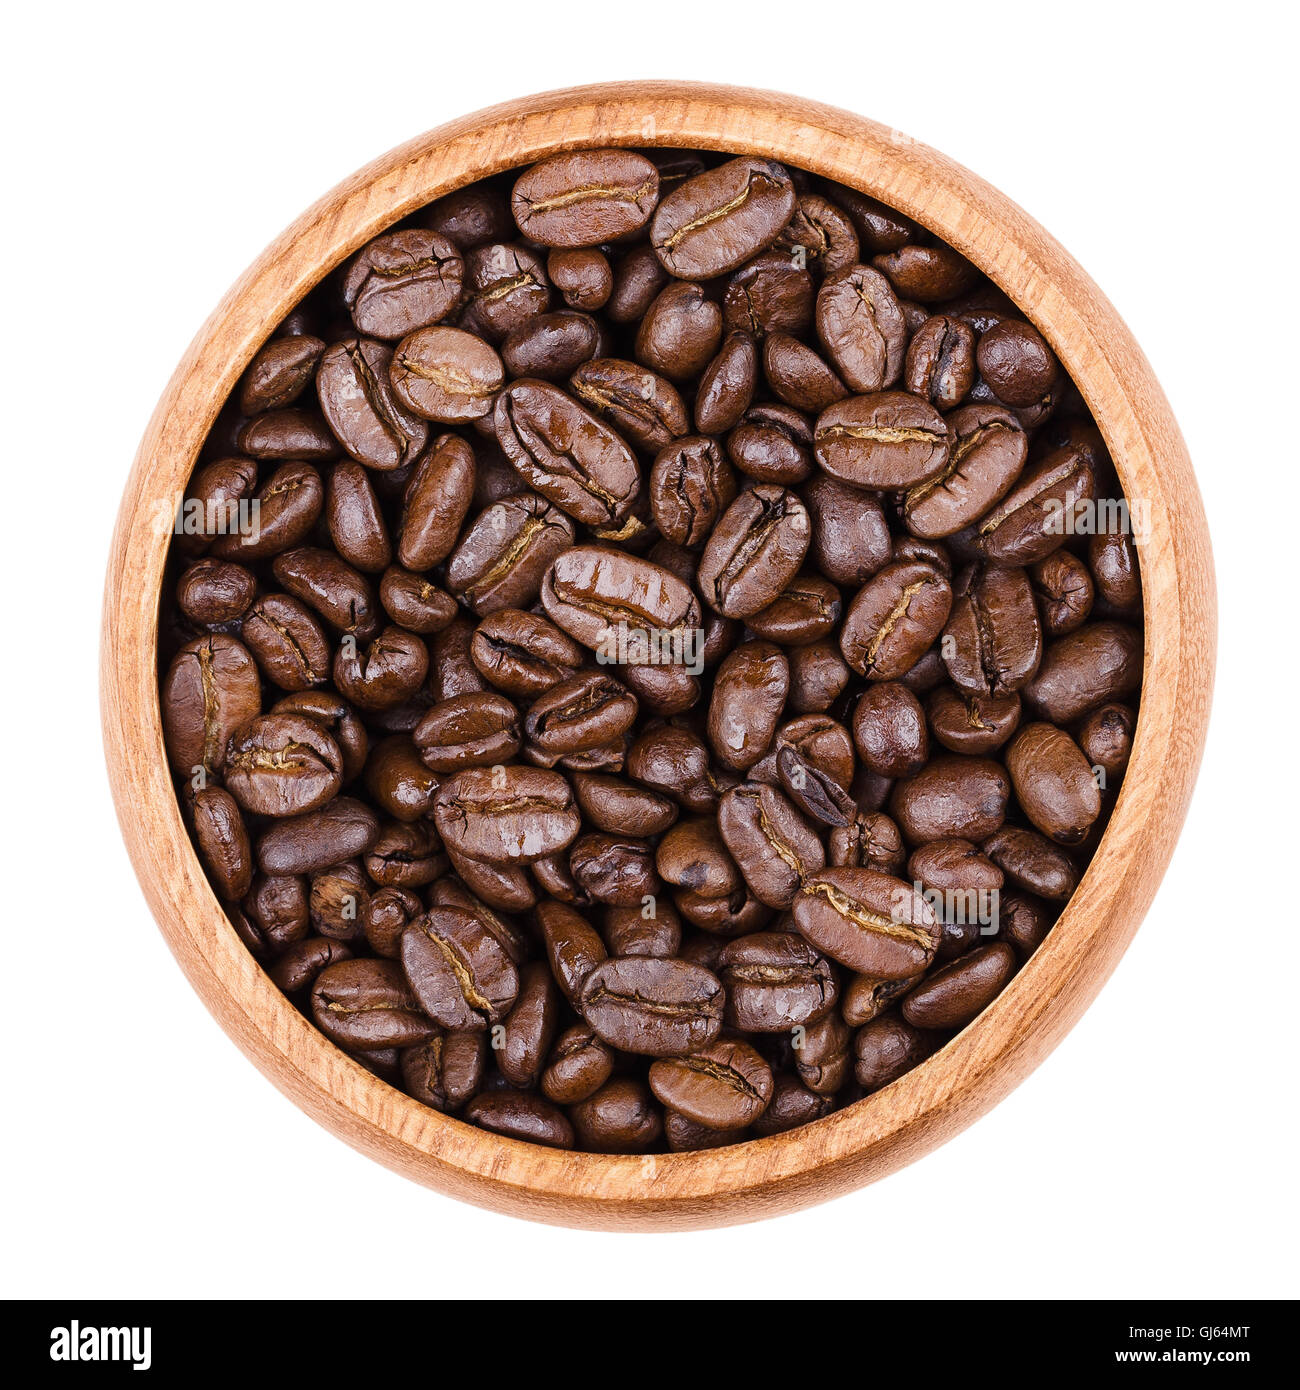 Arabica coffee beans in a wooden bowl on white background. Unpulverized roasted brown pits of the coffee cherries. Stock Photo